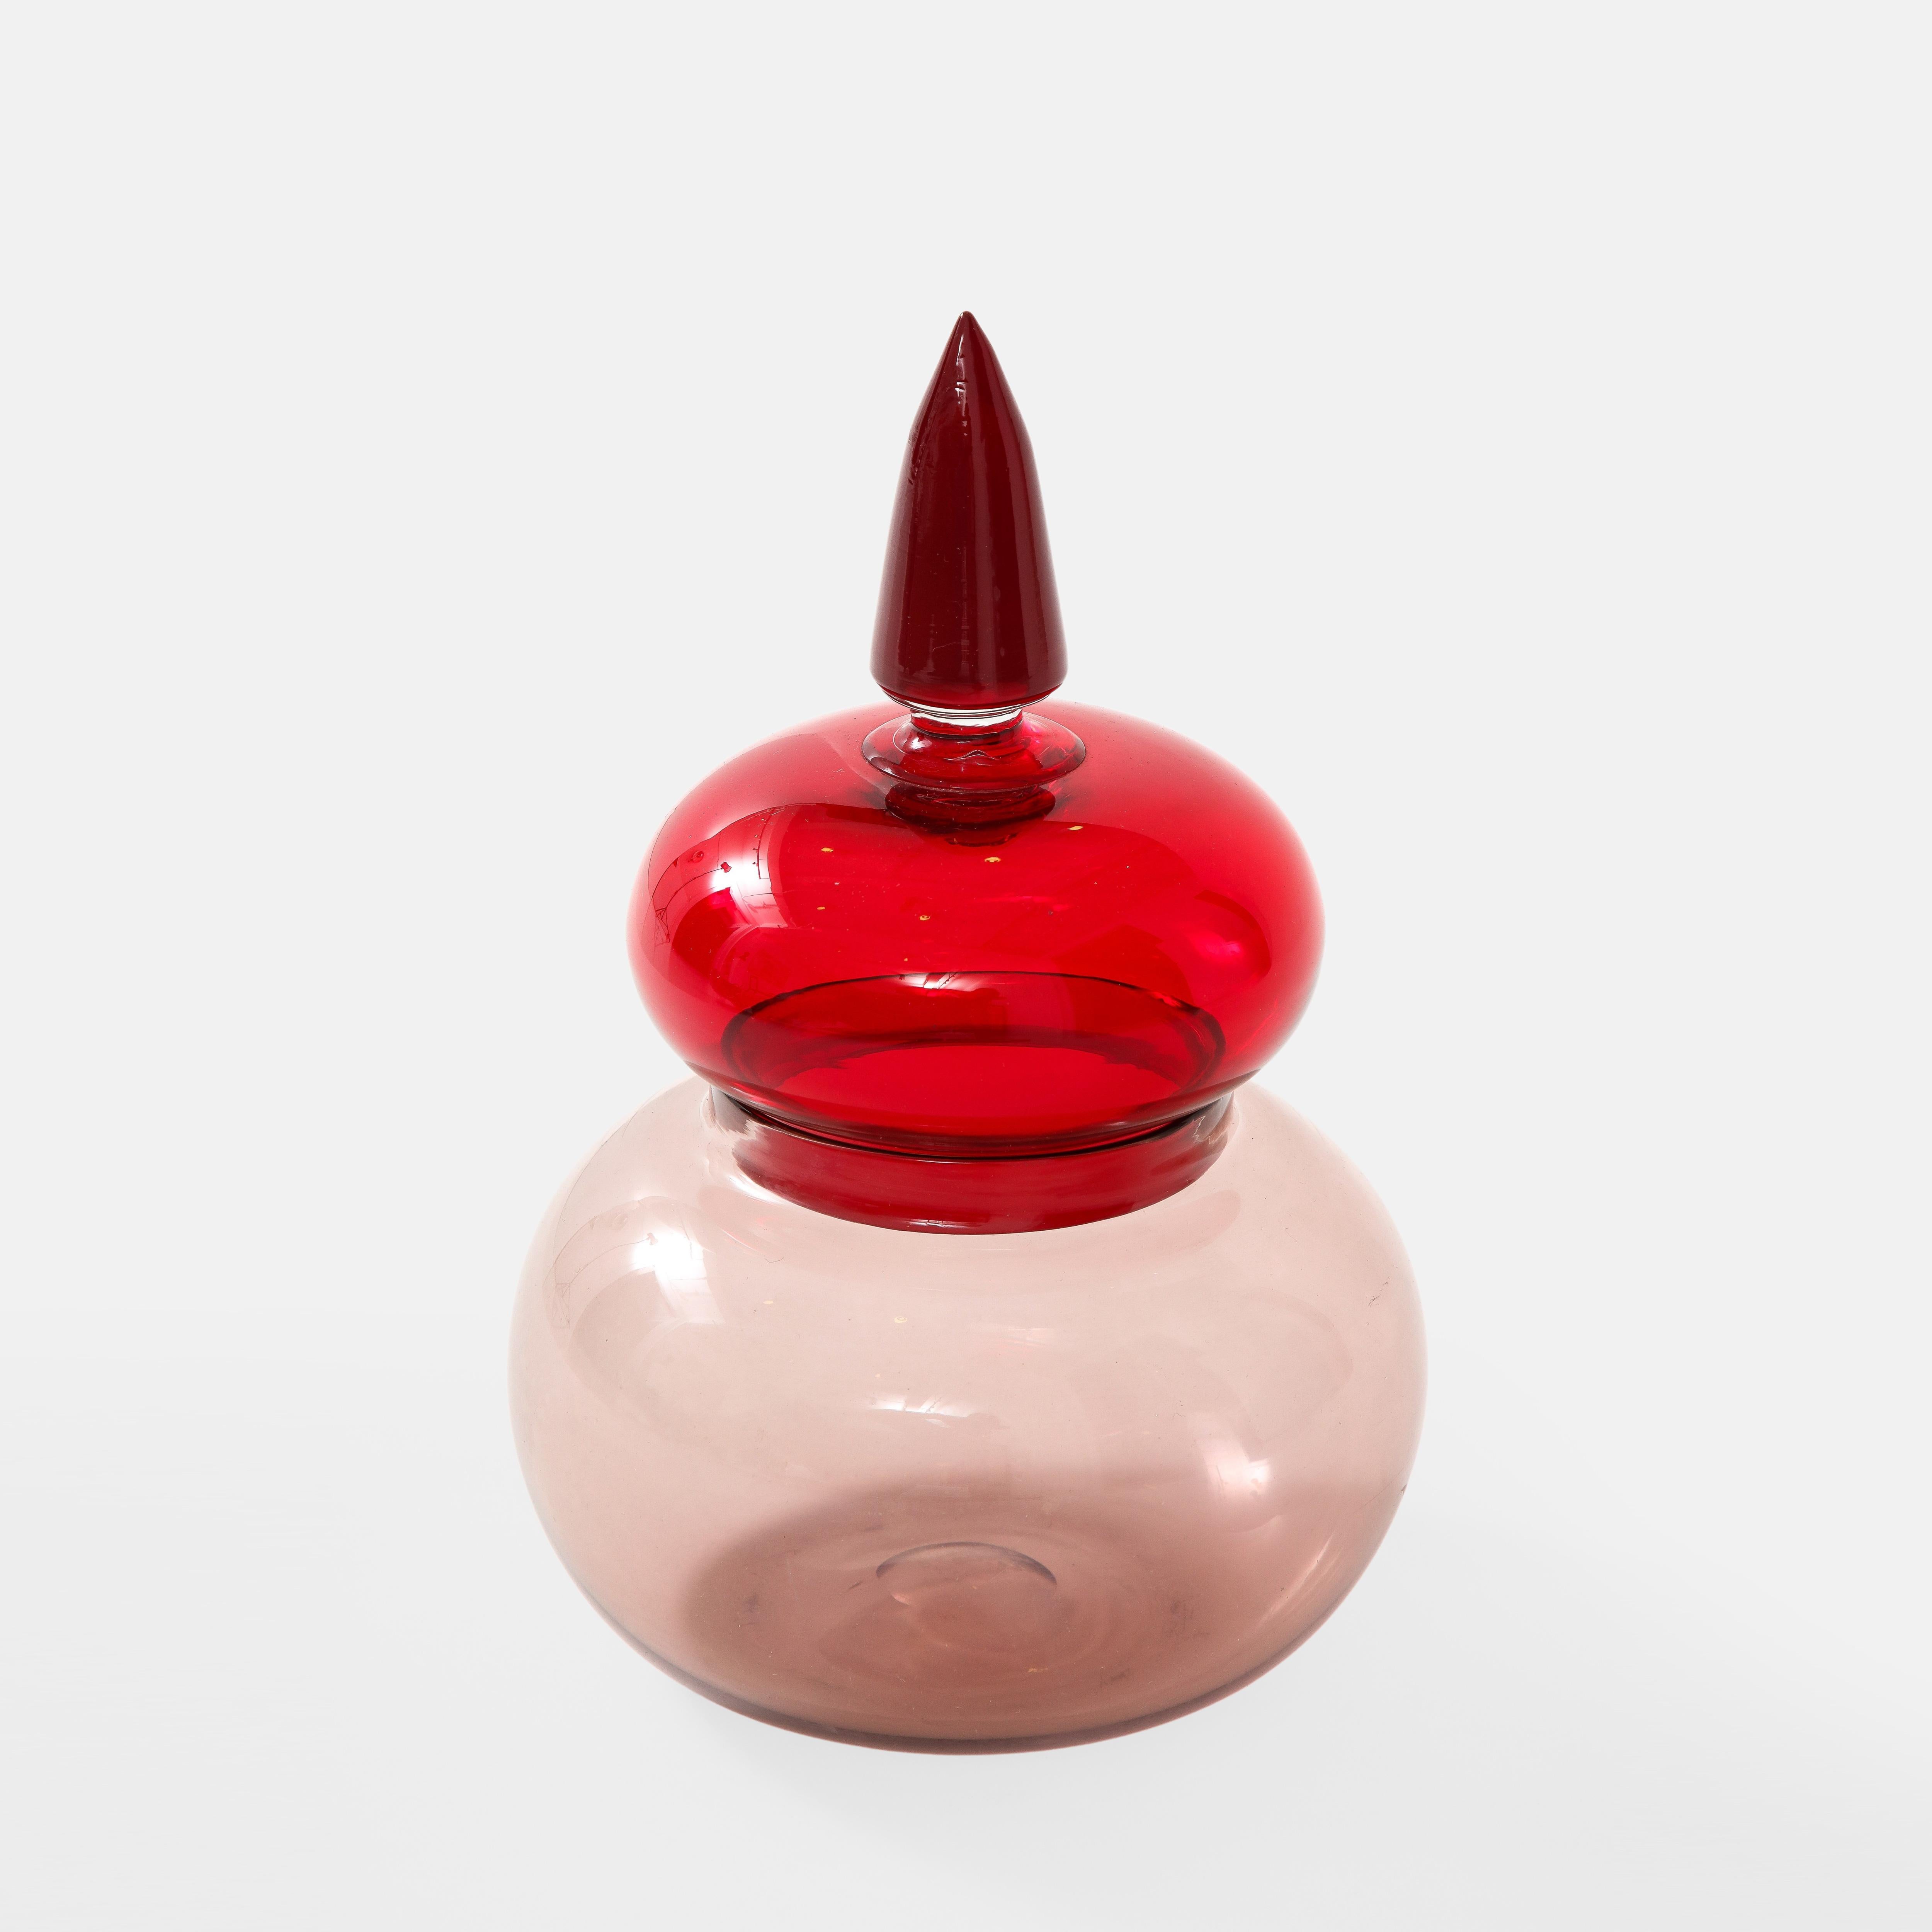 Mid-Century Modern Paolo Venini Rare Apothecary Jar Model 4742 in Red and Mauve Glass, Italy, 1959 For Sale